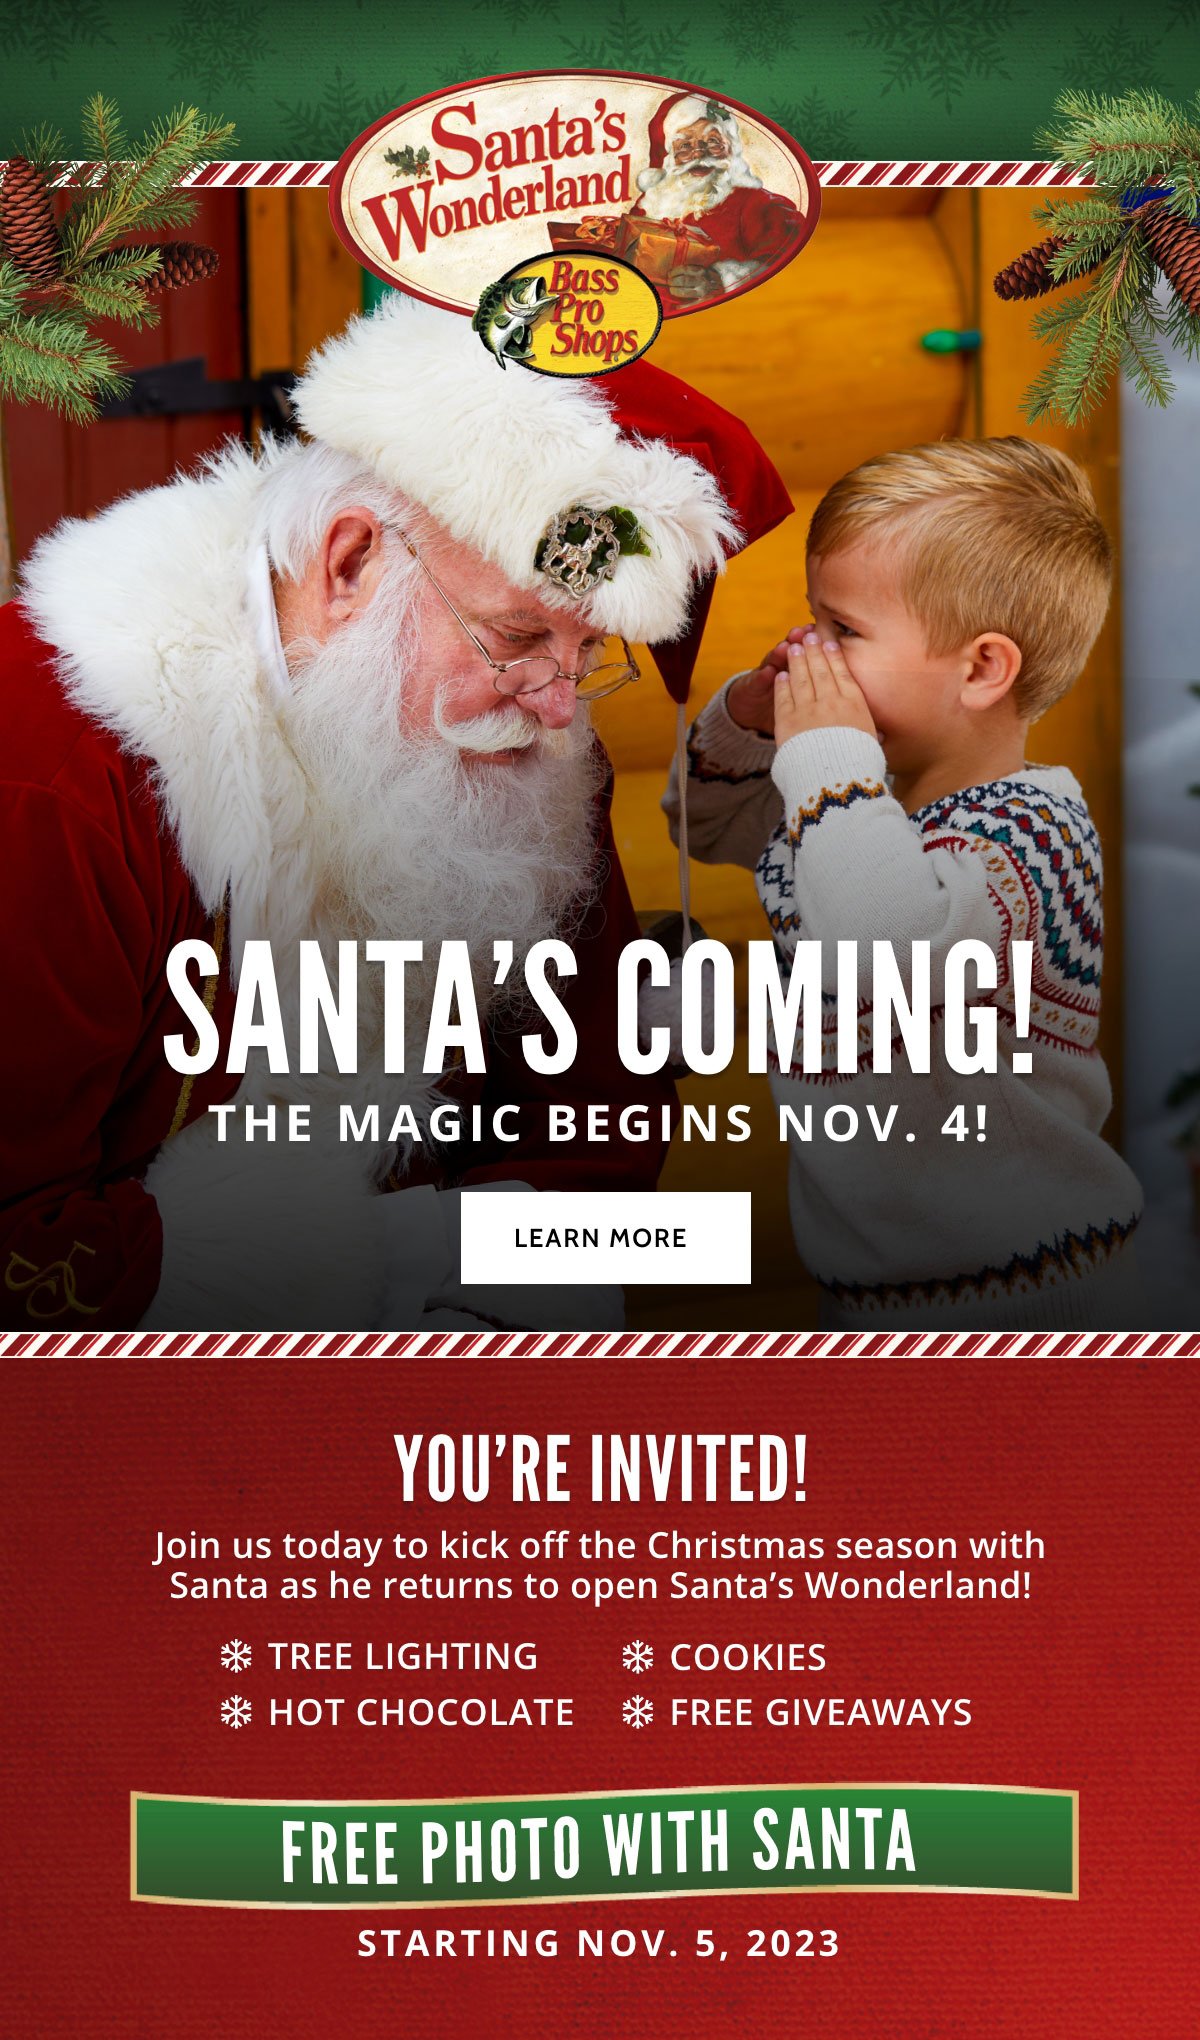 Bass Pro Shops: Santa Is Coming…TODAY!